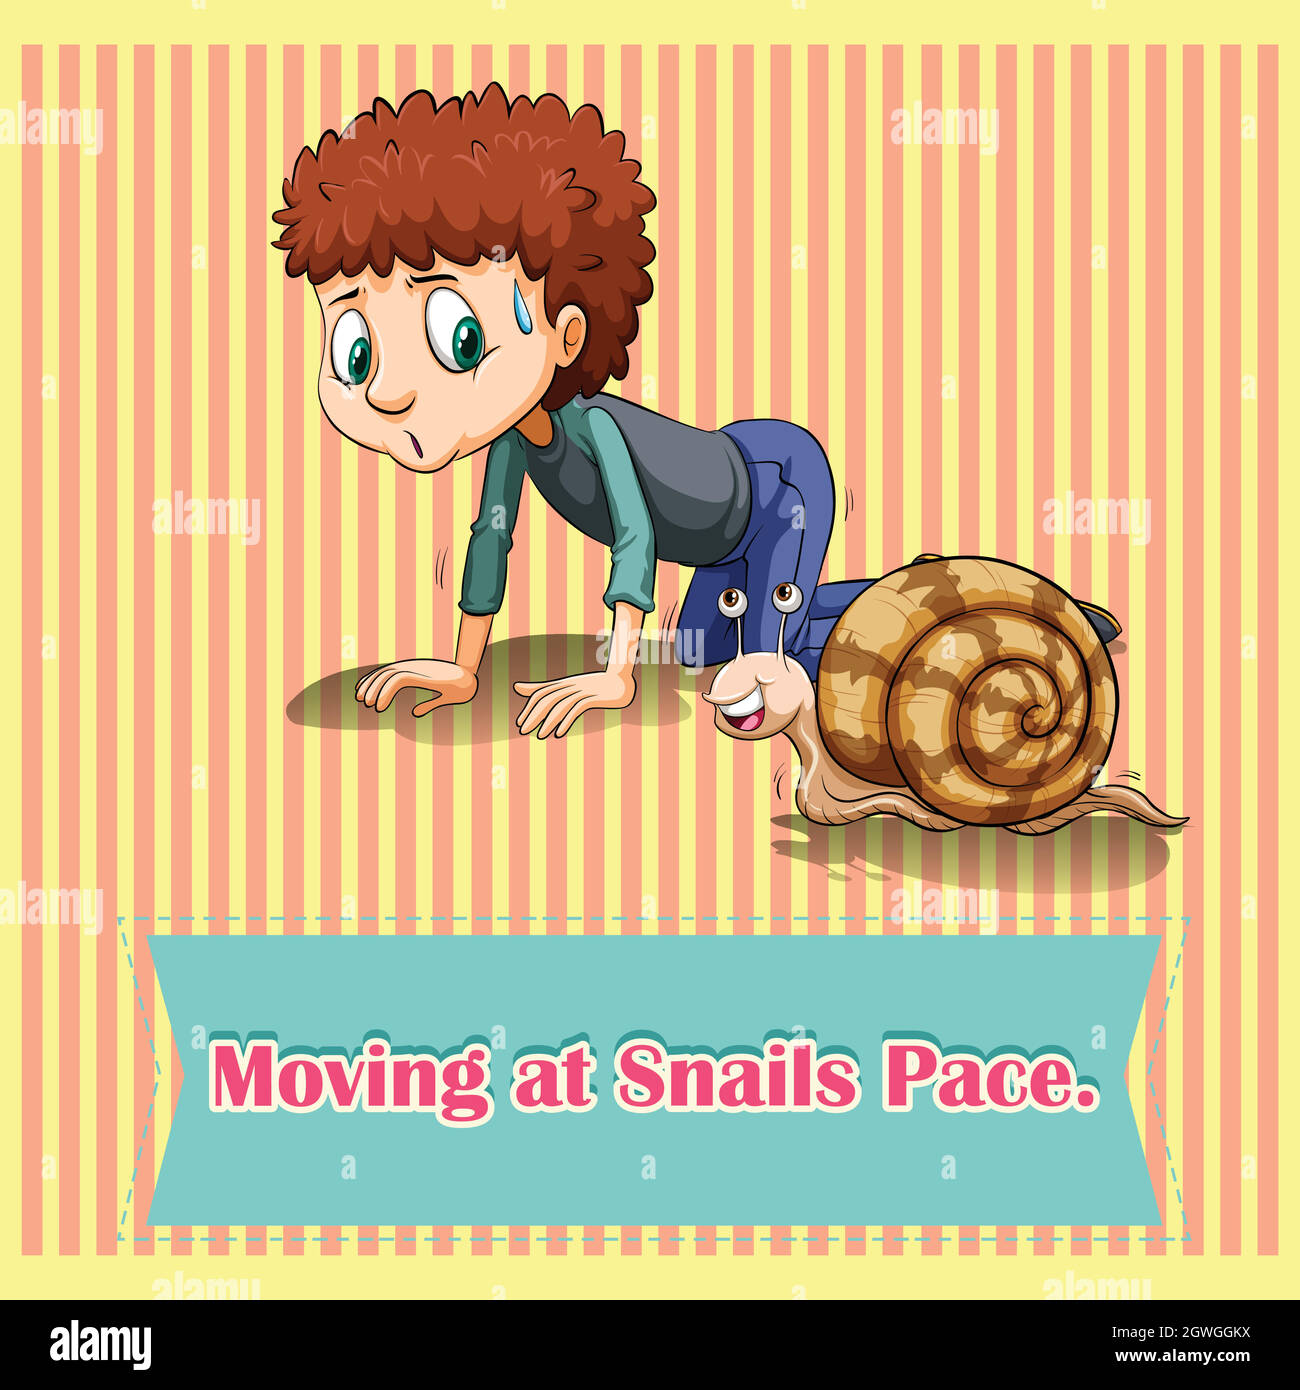 Moving at snails pace Stock Vector